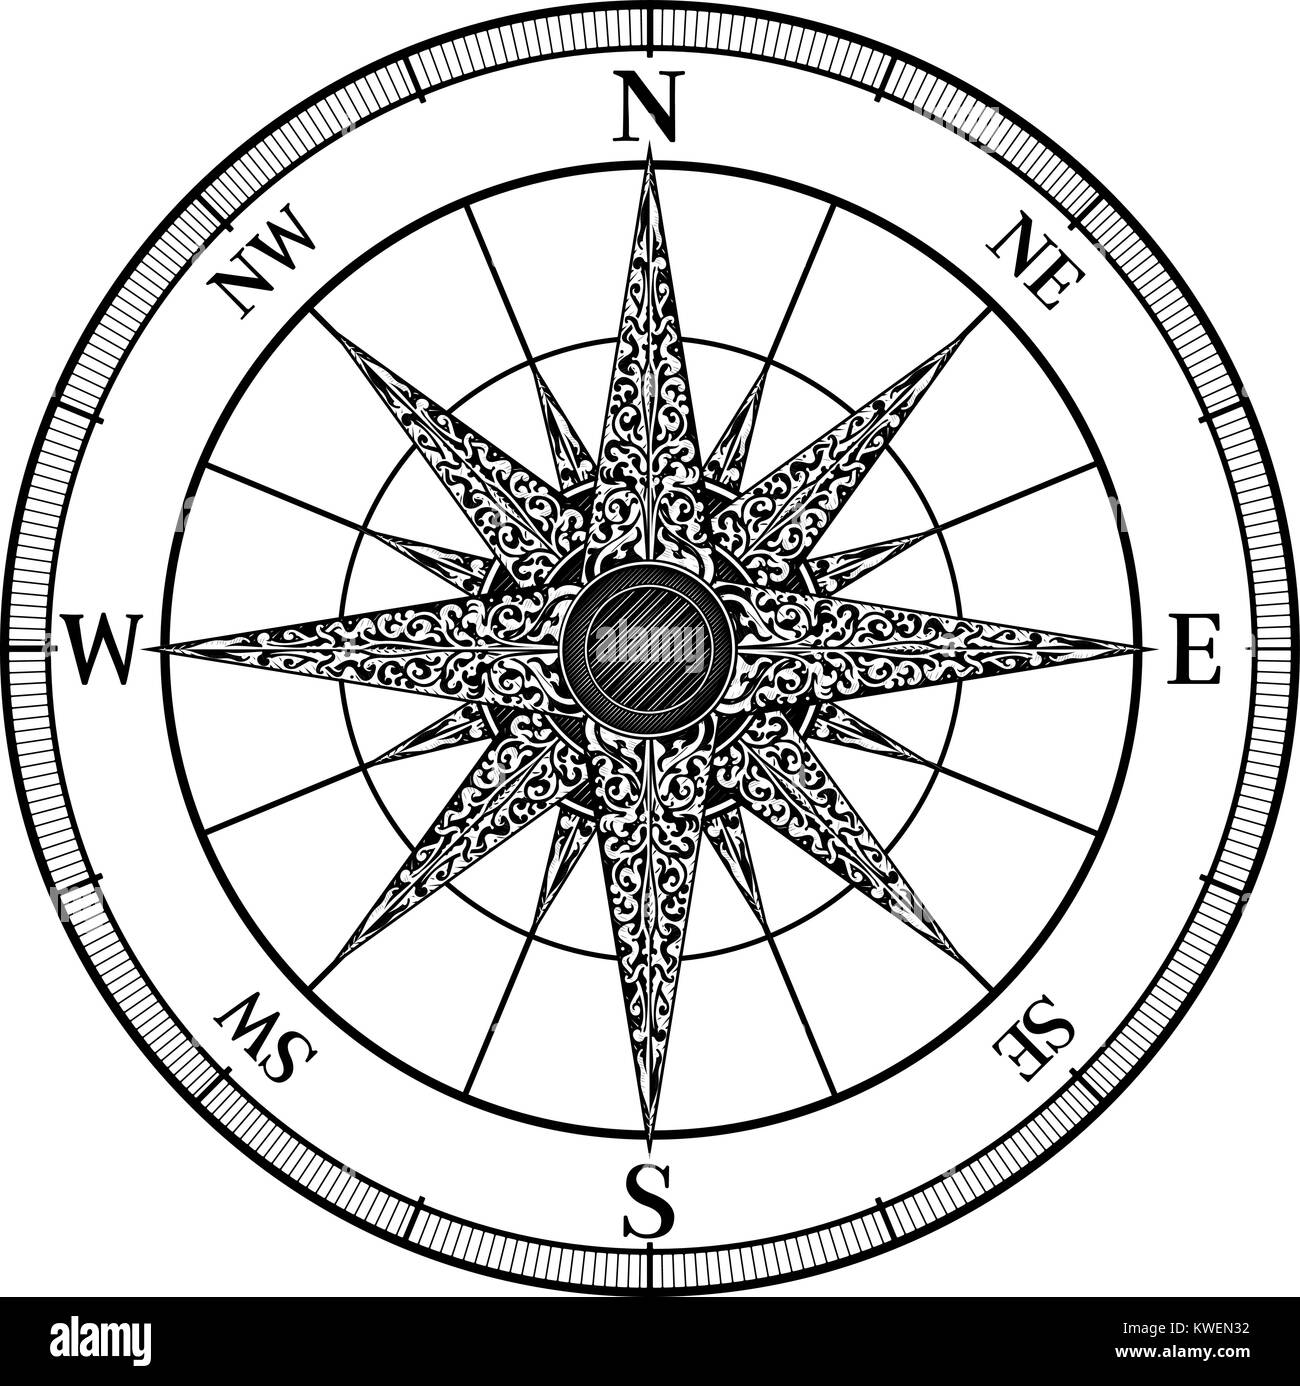 Compass Vintage Rose Stock Vector